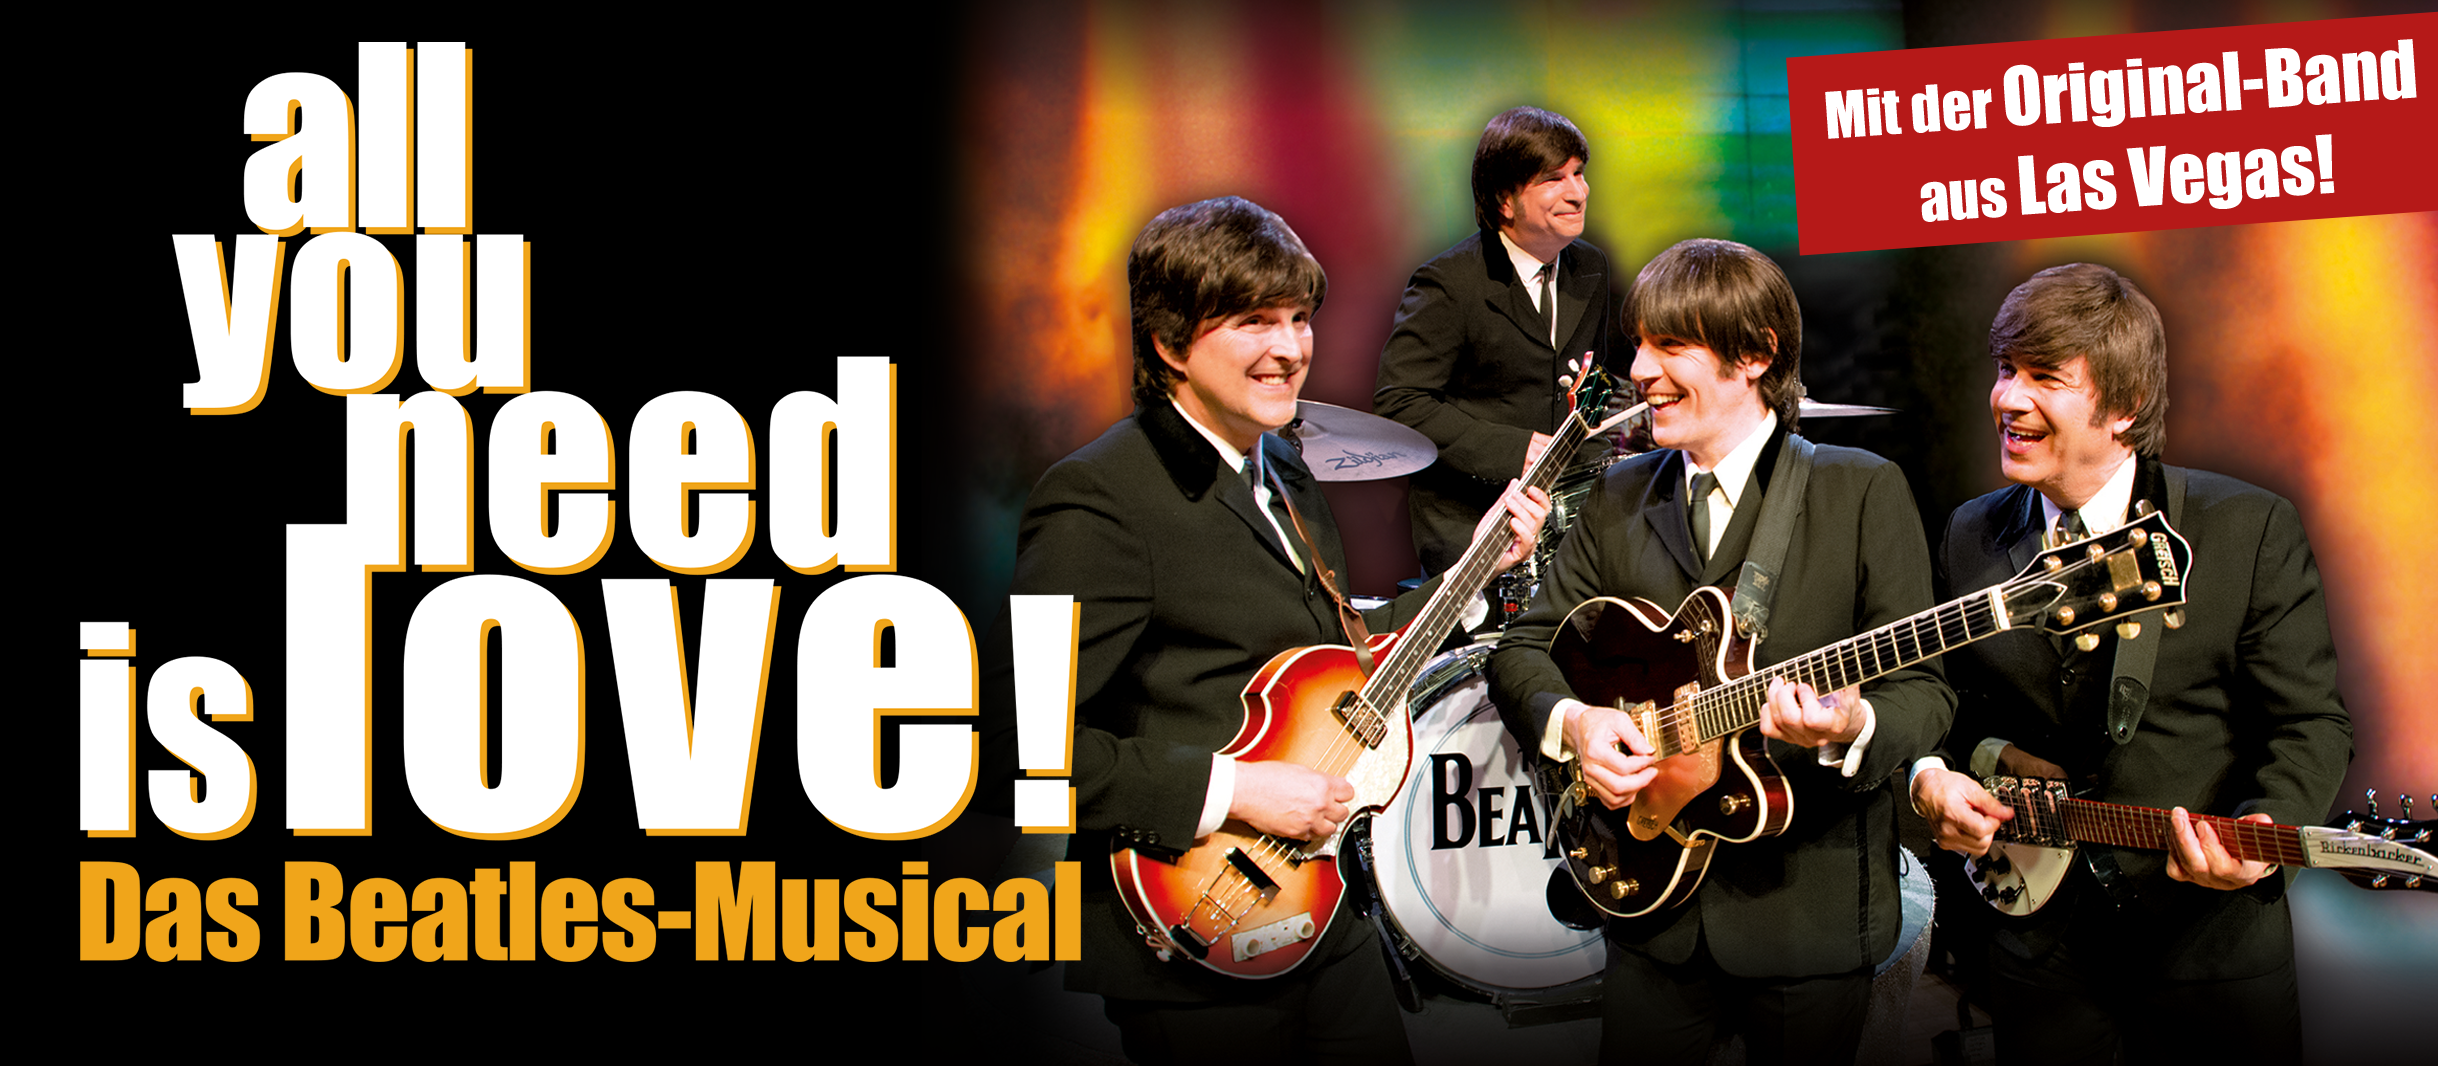 all you need is love - das Beatles-Musical